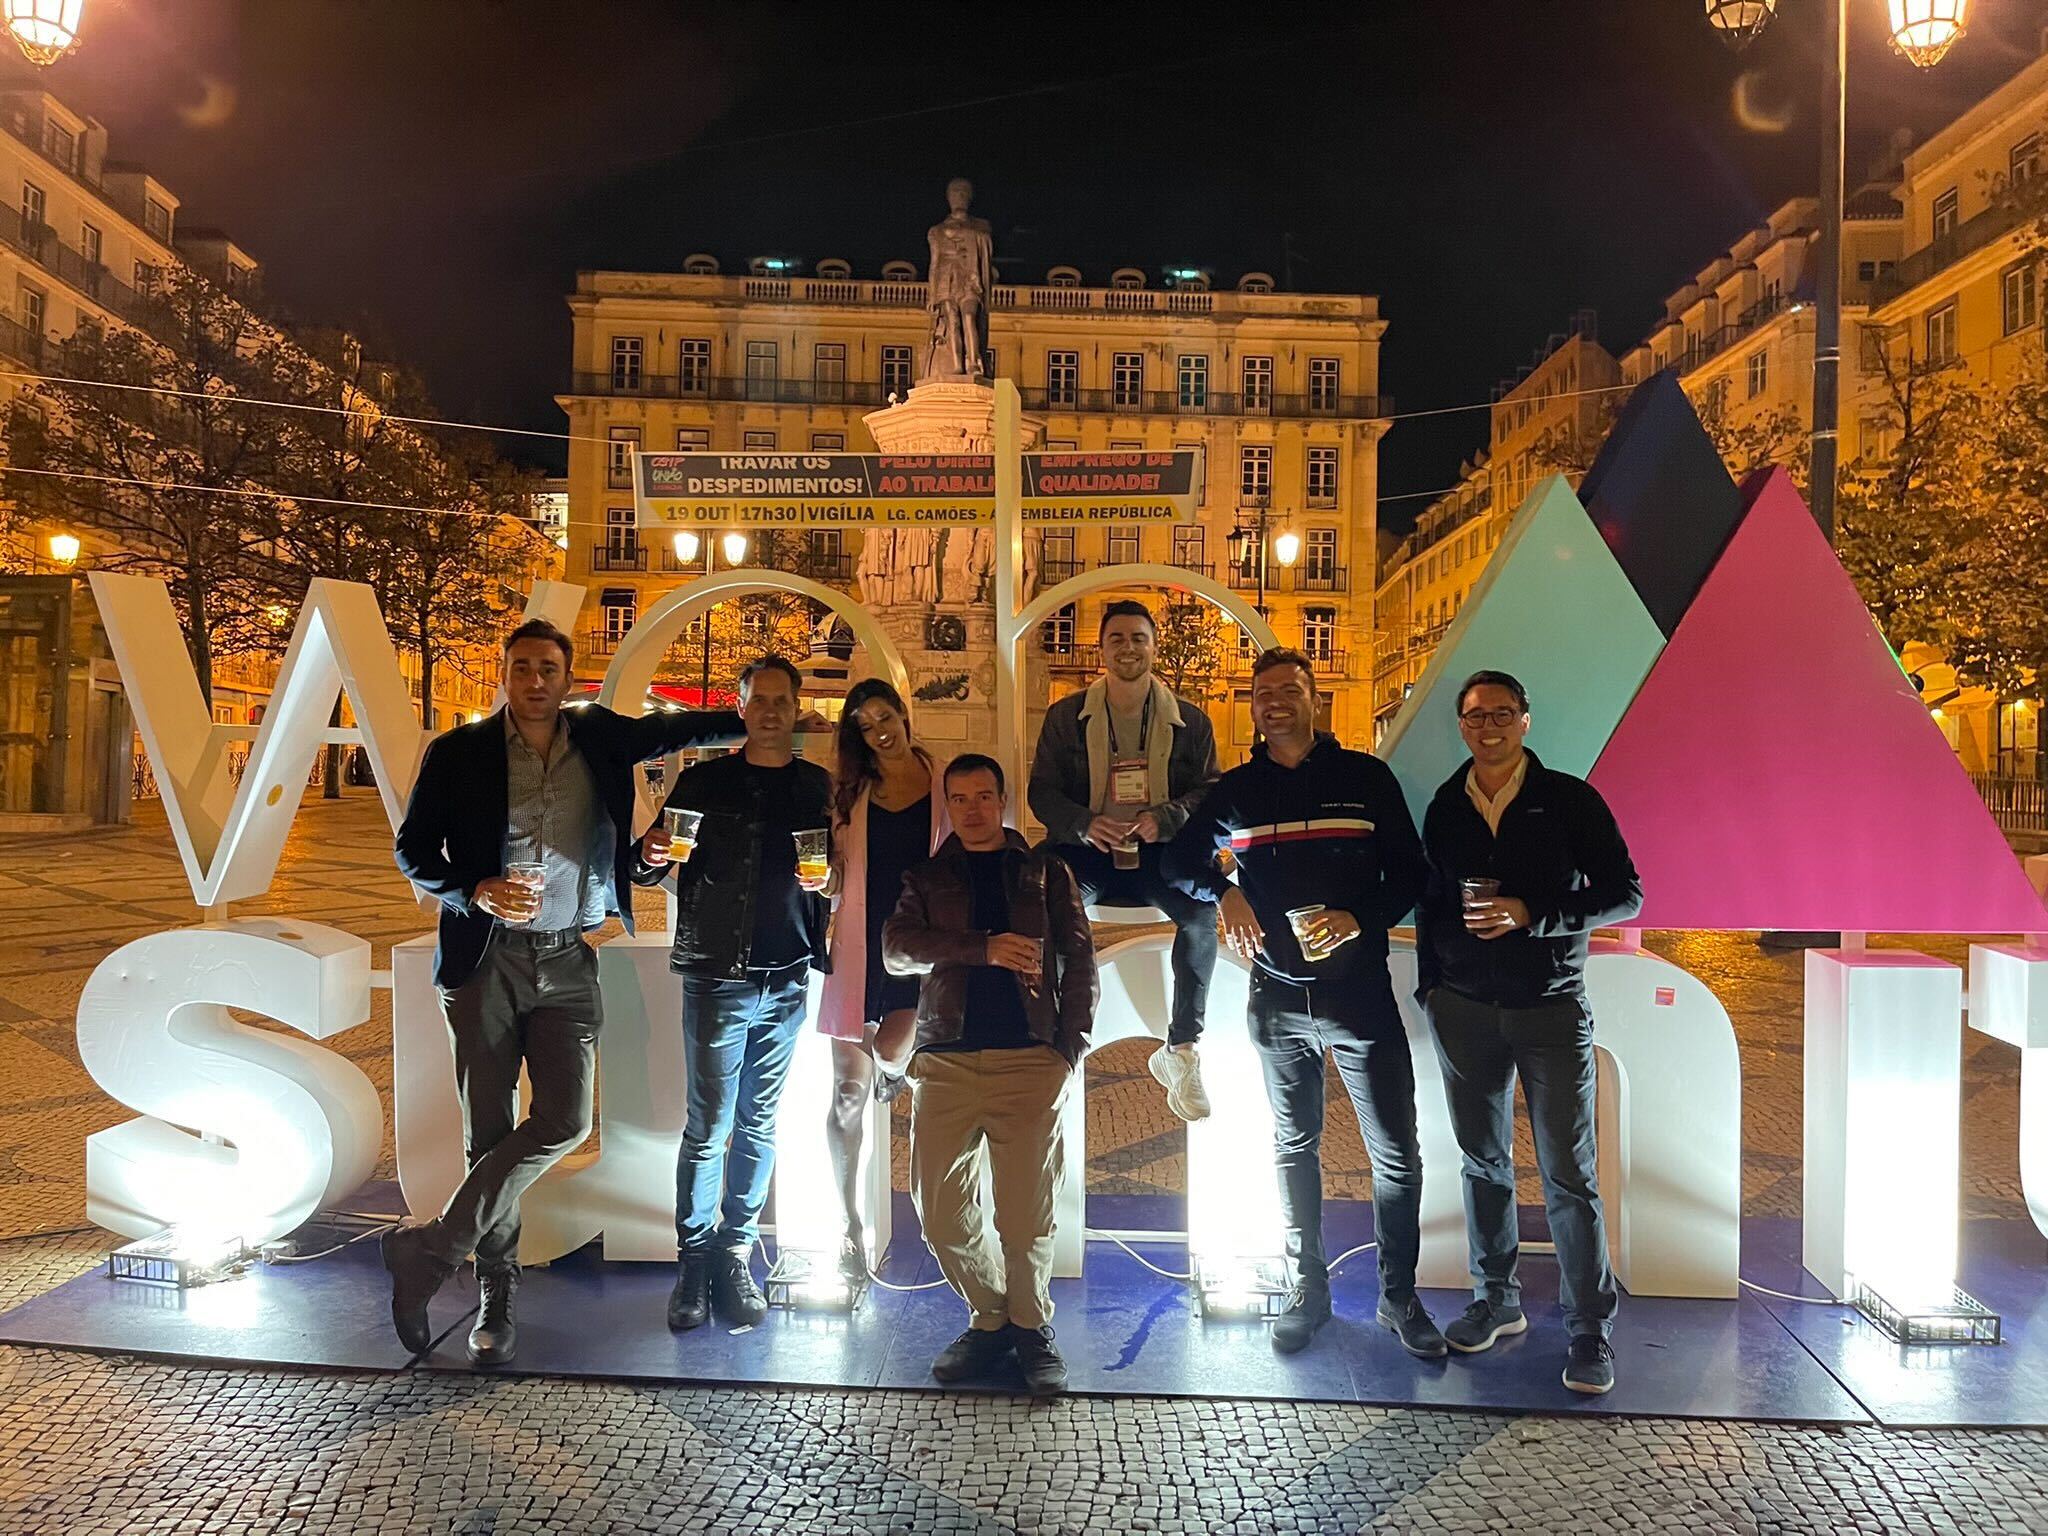 Web Summit 2021: Europe’s largest tech conference comes alive at night